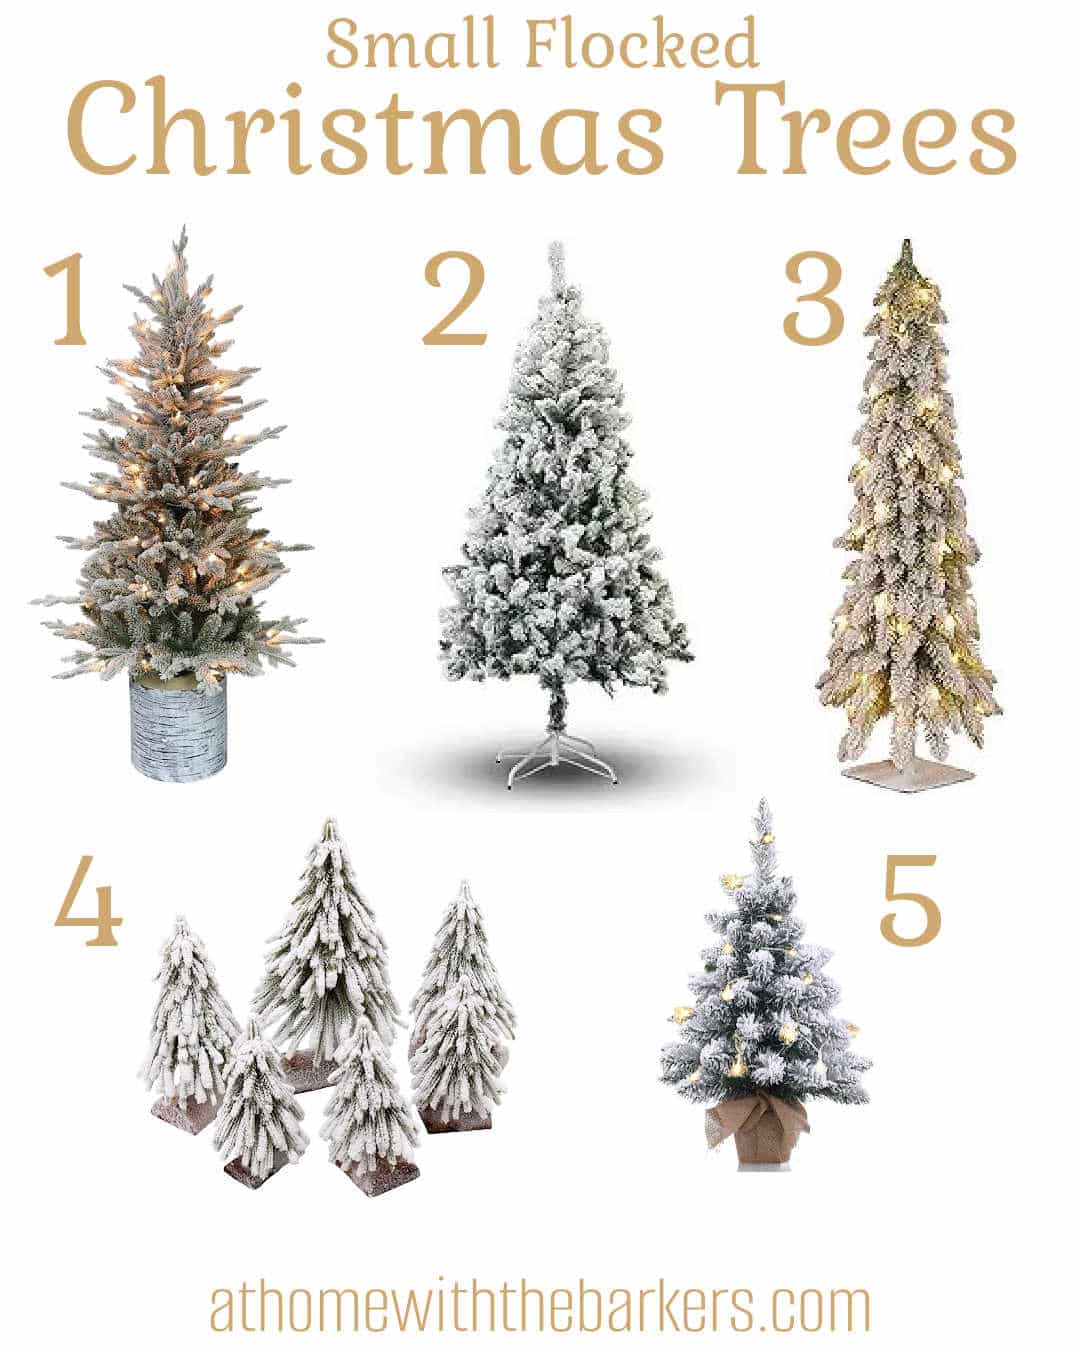 Graphic with photos of 5 small flocked christmas trees to buy